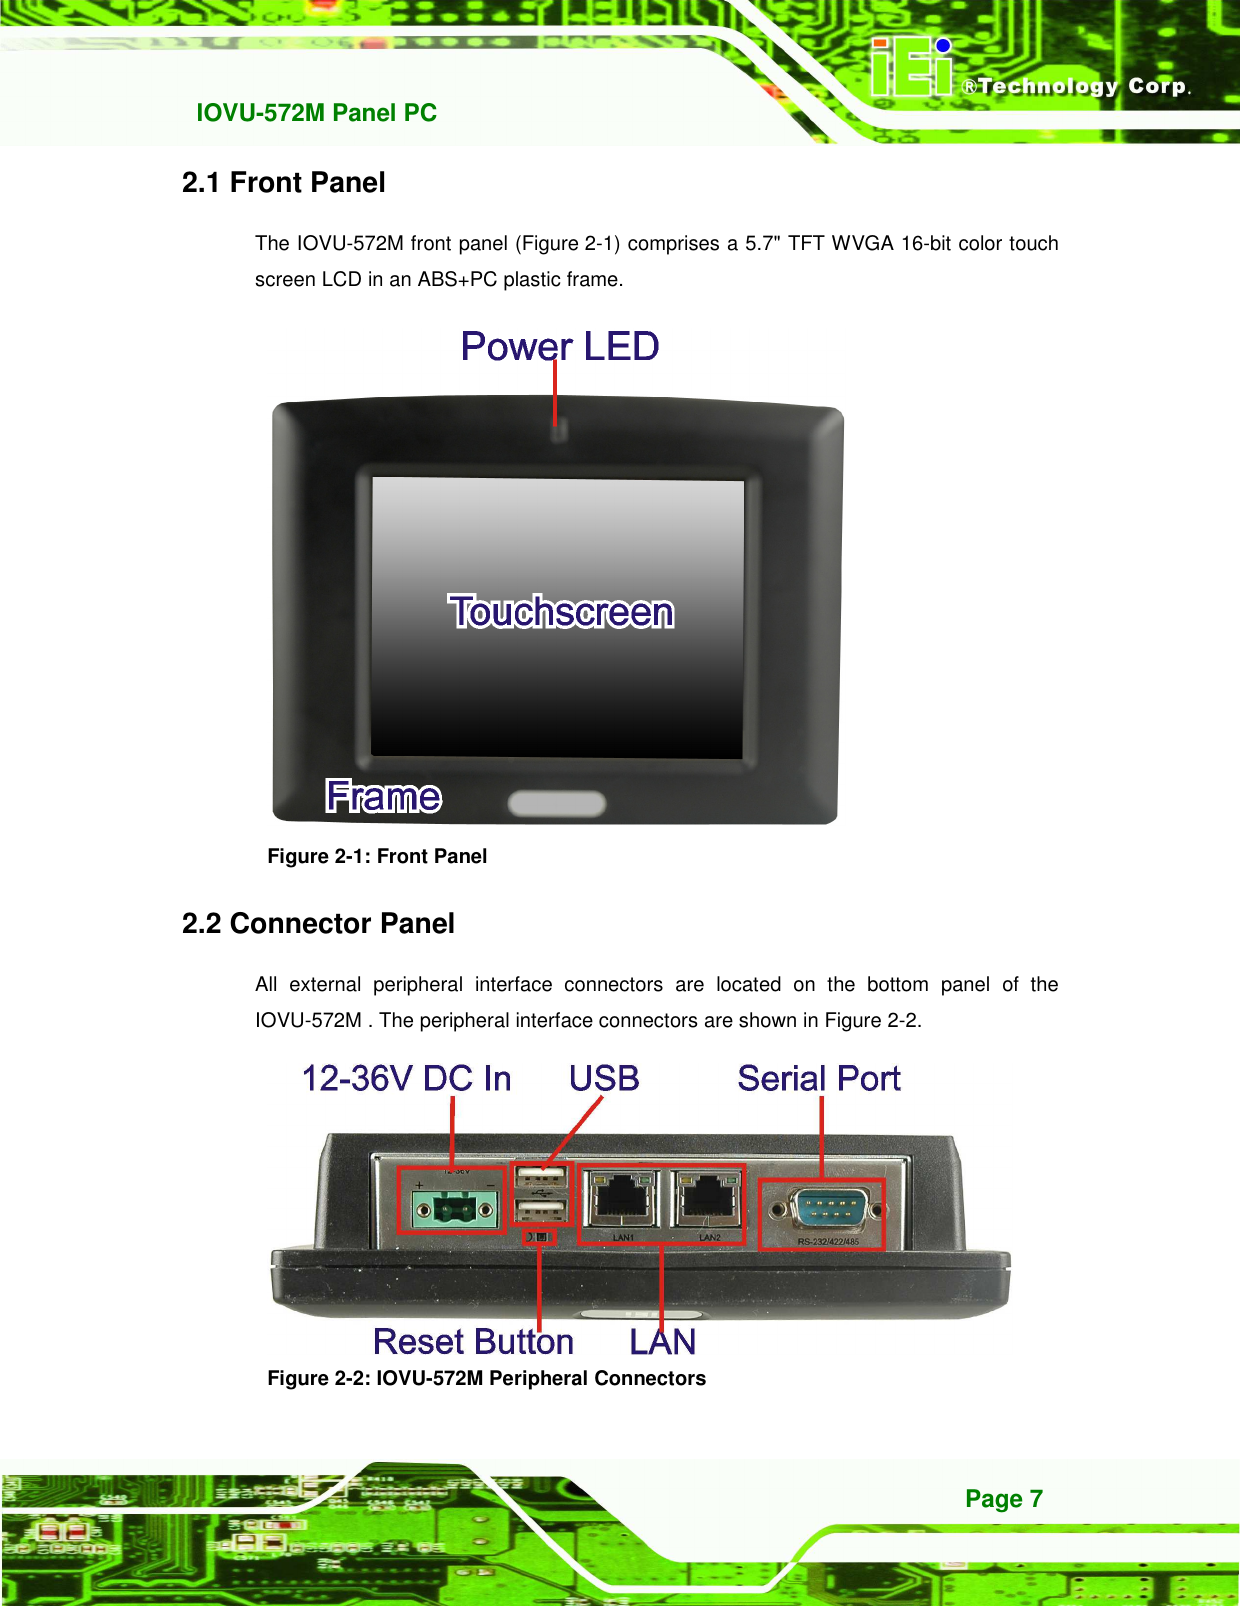   IOVU-572M Panel PC Page 7 2.1 Front Panel The IOVU-572M front panel (Figure 2-1) comprises a 5.7&quot; TFT WVGA 16-bit color touch screen LCD in an ABS+PC plastic frame.  Figure 2-1: Front Panel 2.2 Connector Panel All  external  peripheral  interface  connectors  are  located  on  the  bottom  panel  of  the IOVU-572M . The peripheral interface connectors are shown in Figure 2-2.  Figure 2-2: IOVU-572M Peripheral Connectors 